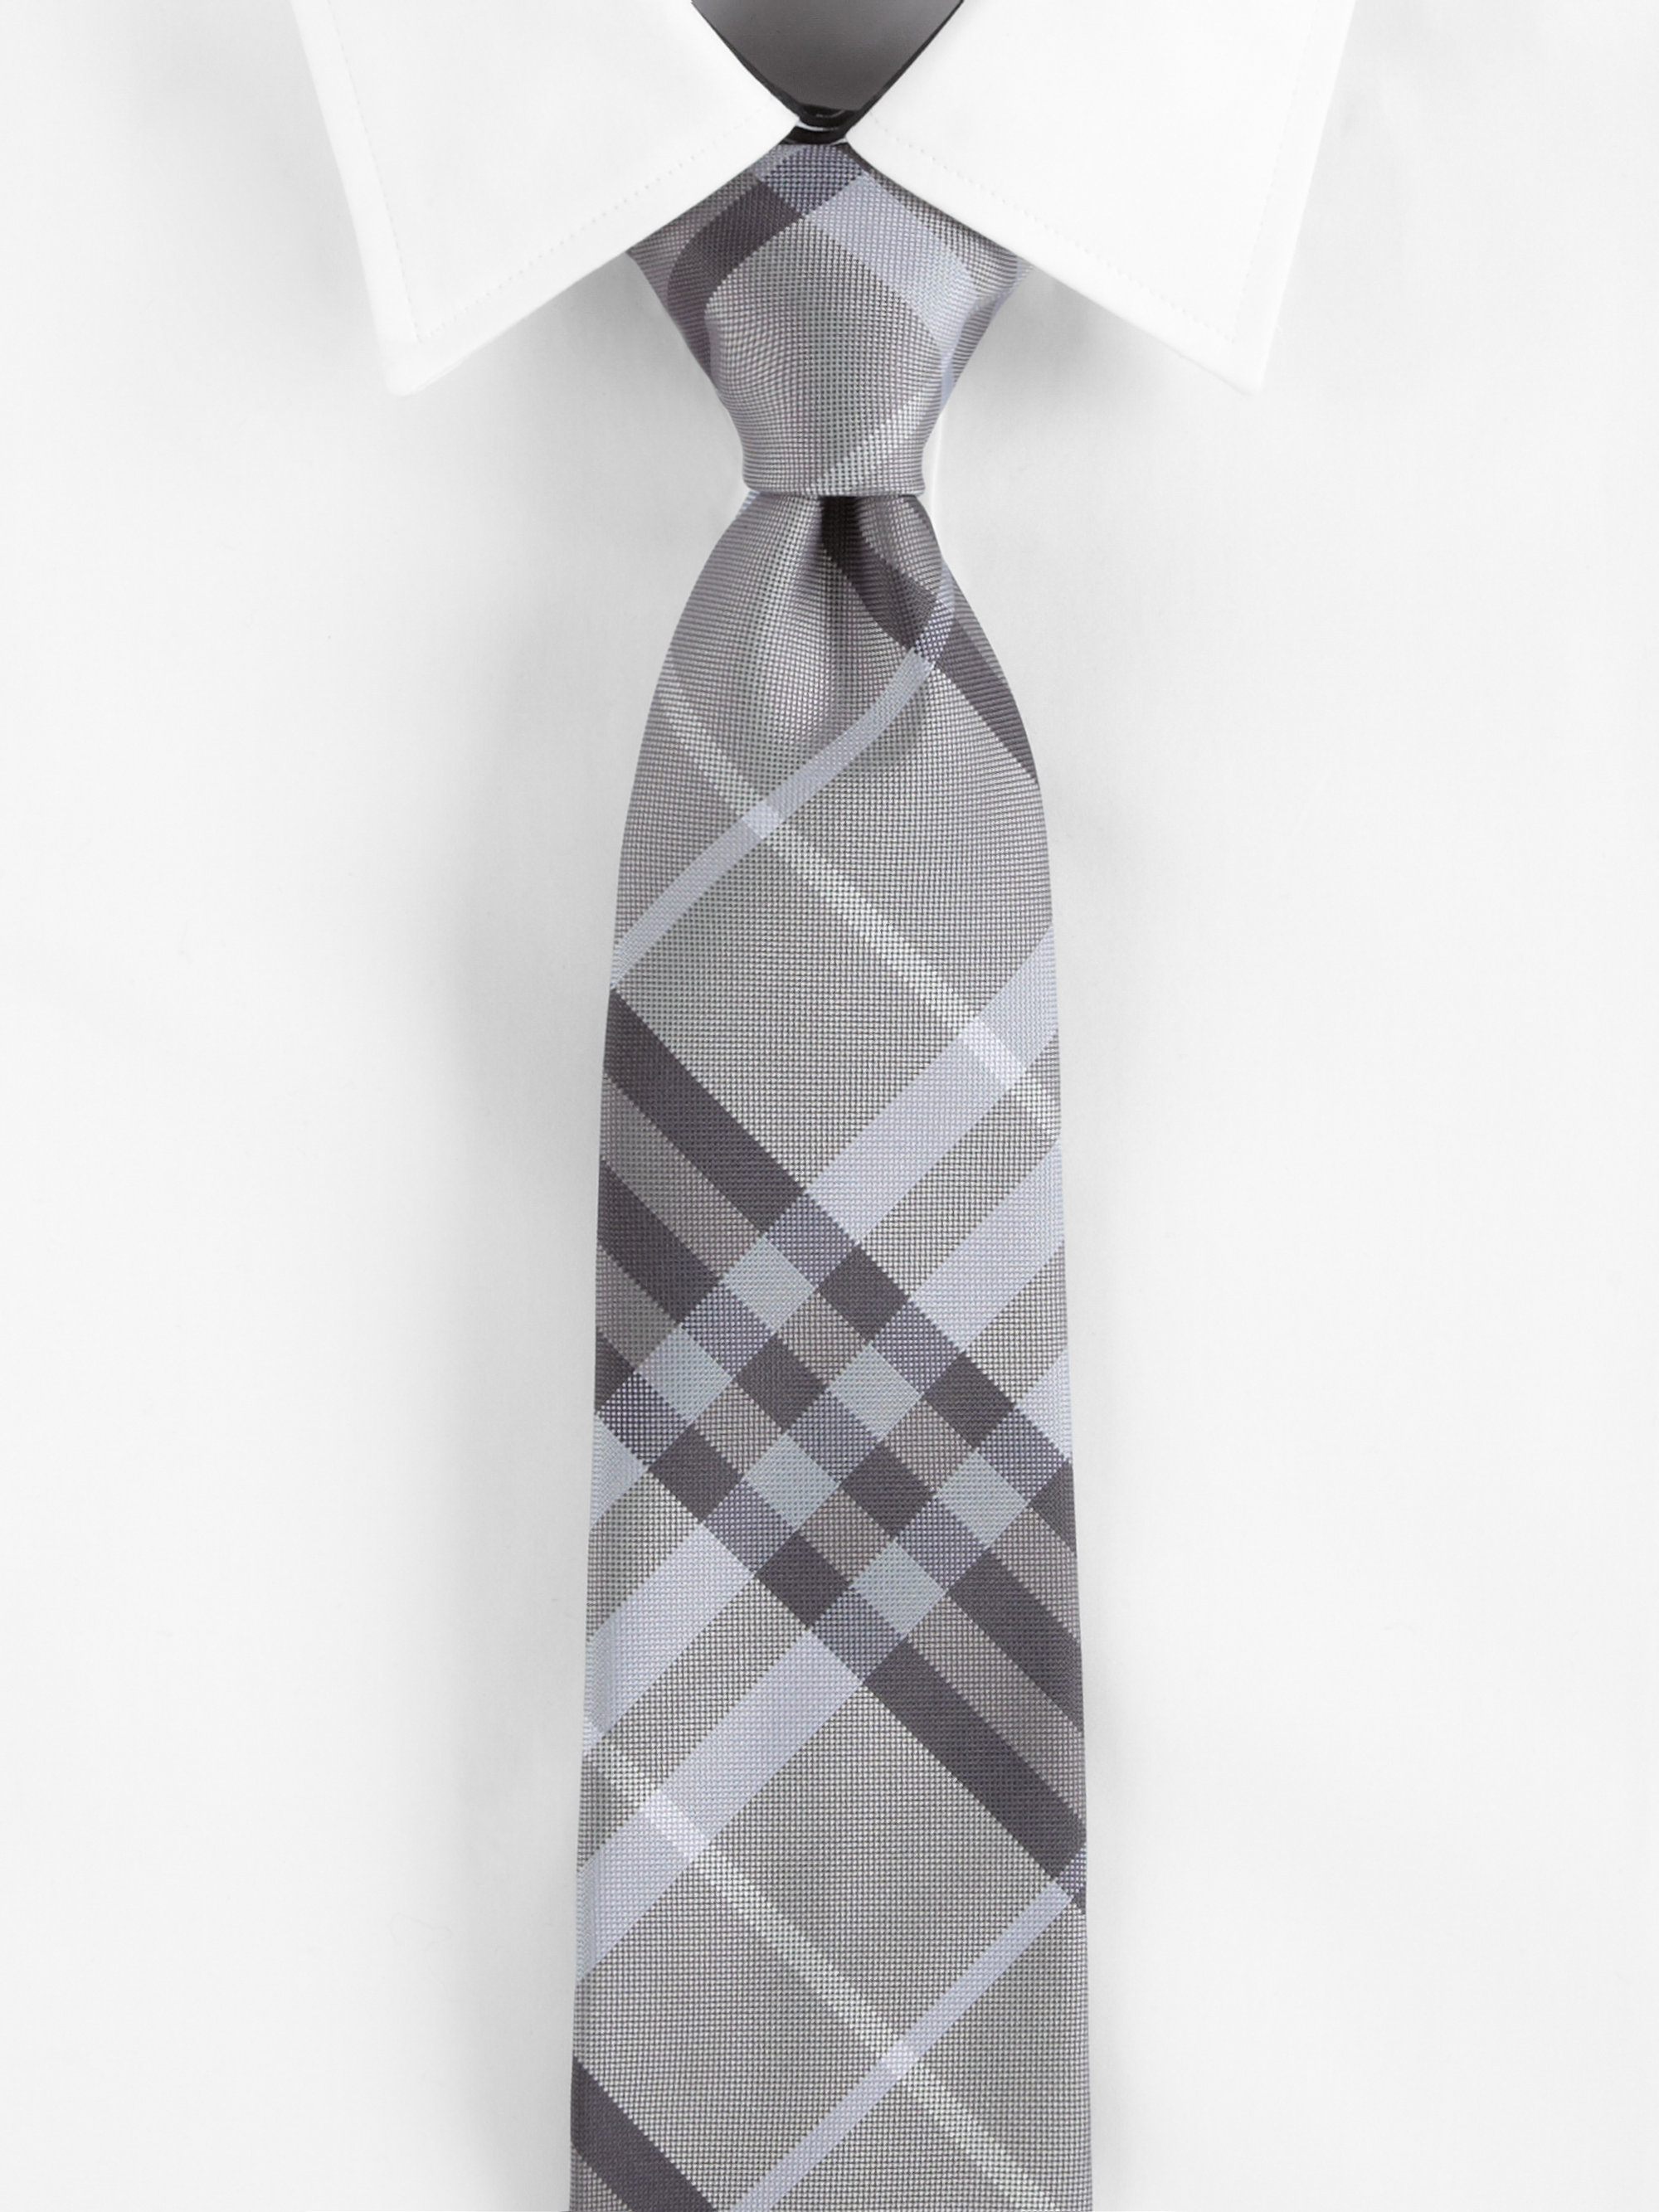 burberry ties outlet